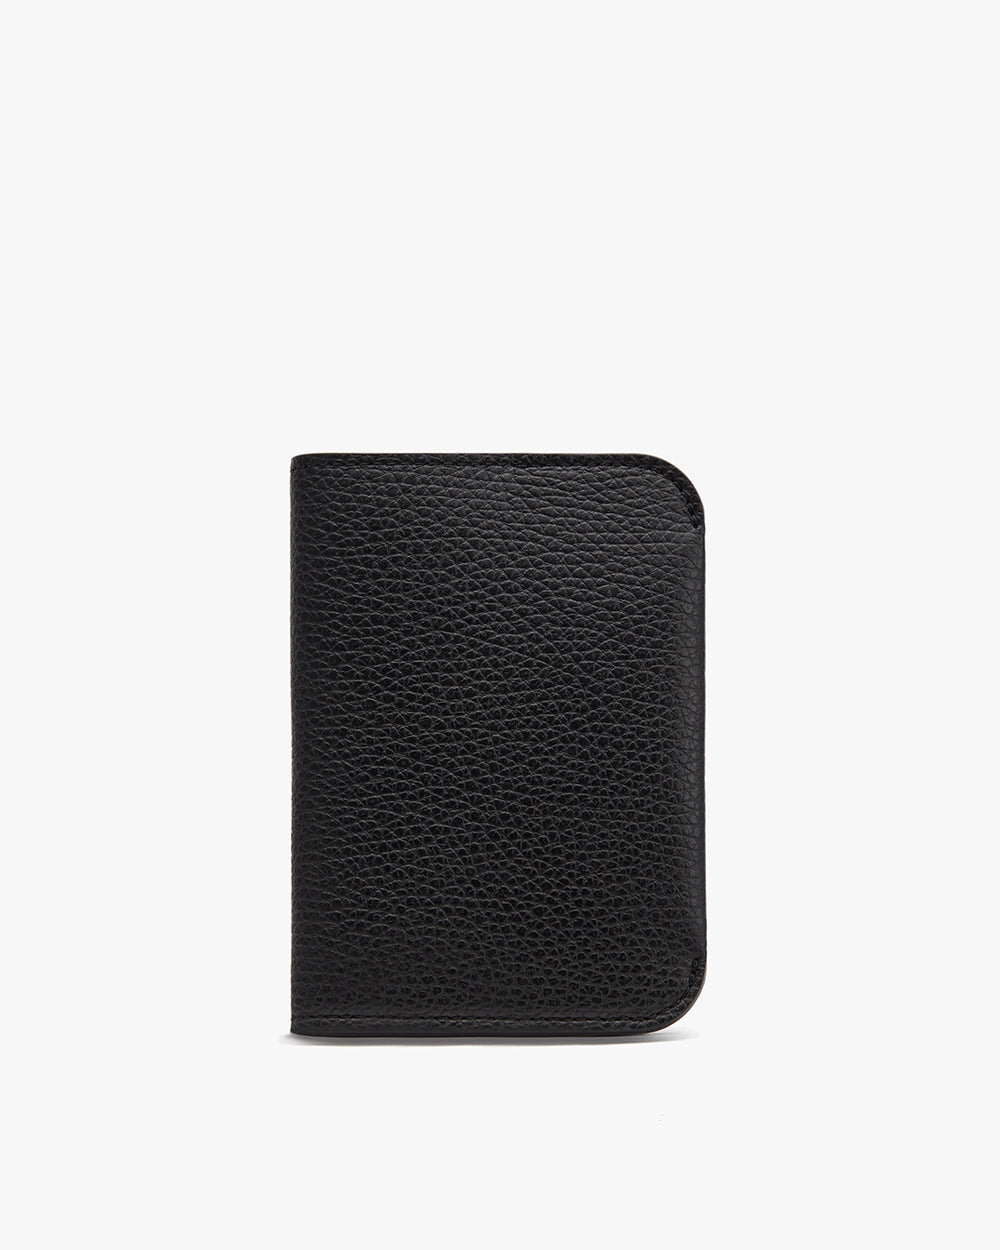 Leather wallet with rounded corners on a plain background.